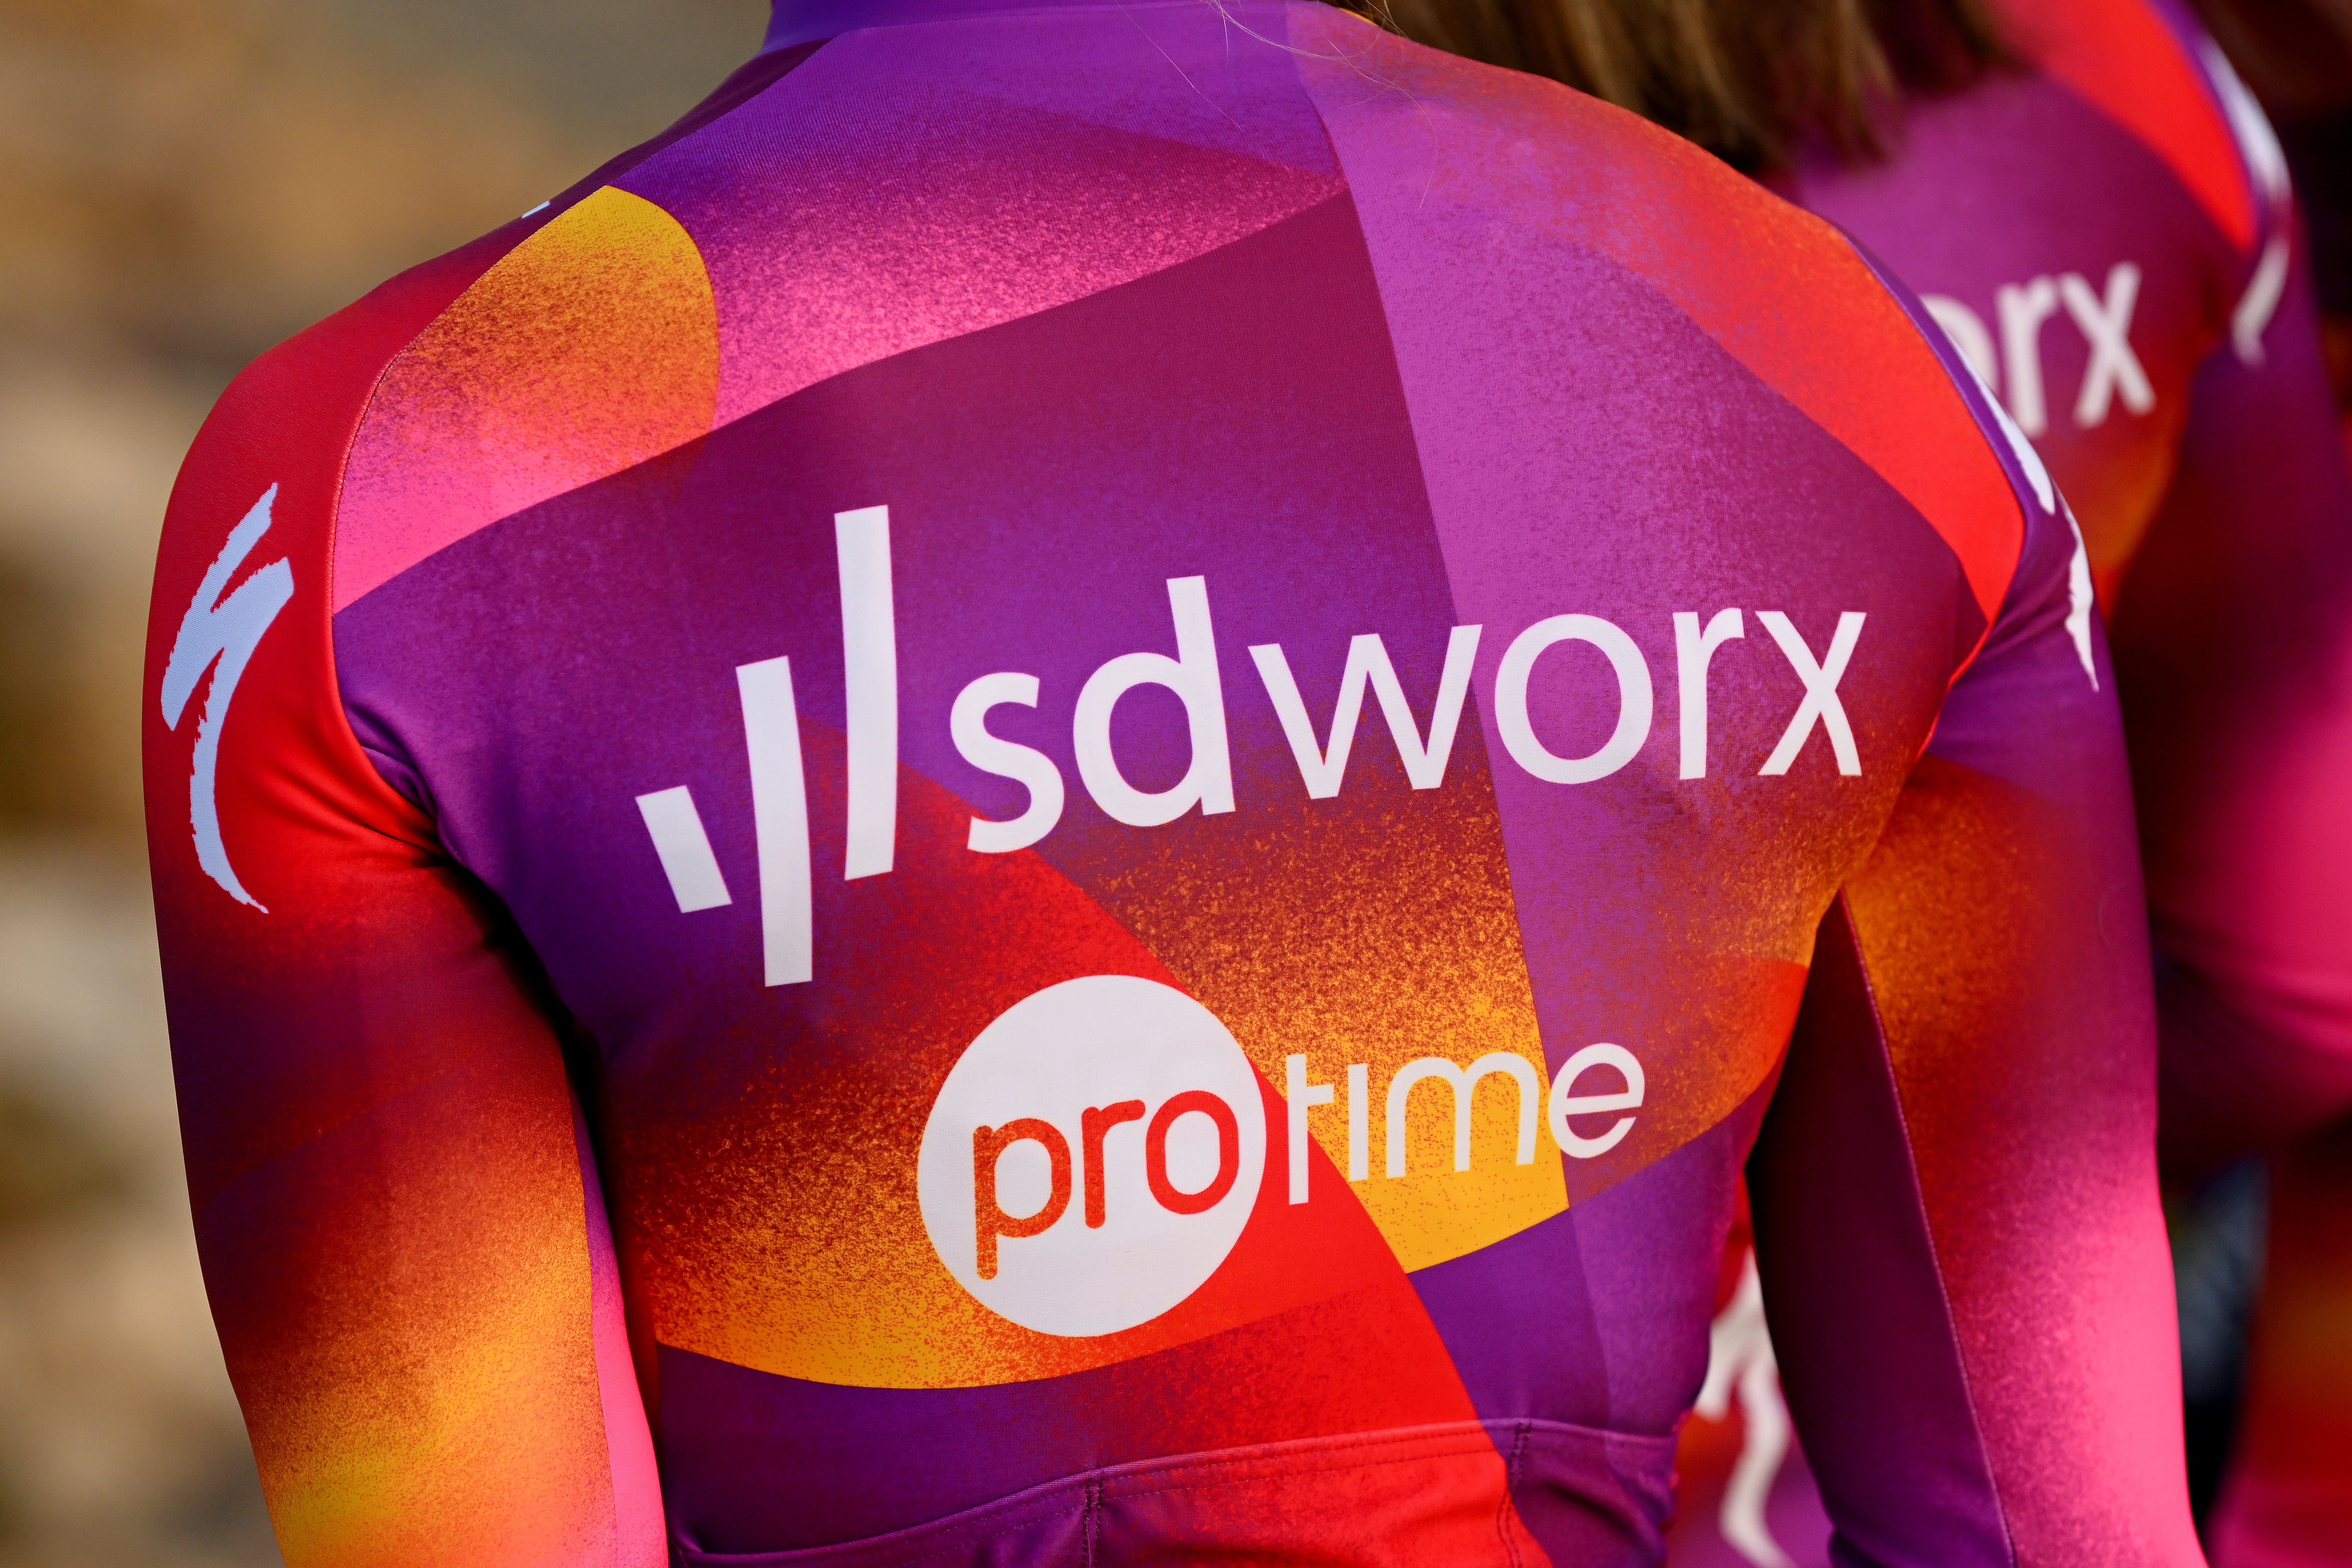 Team SD Worx - Protime - (c) Getty Images